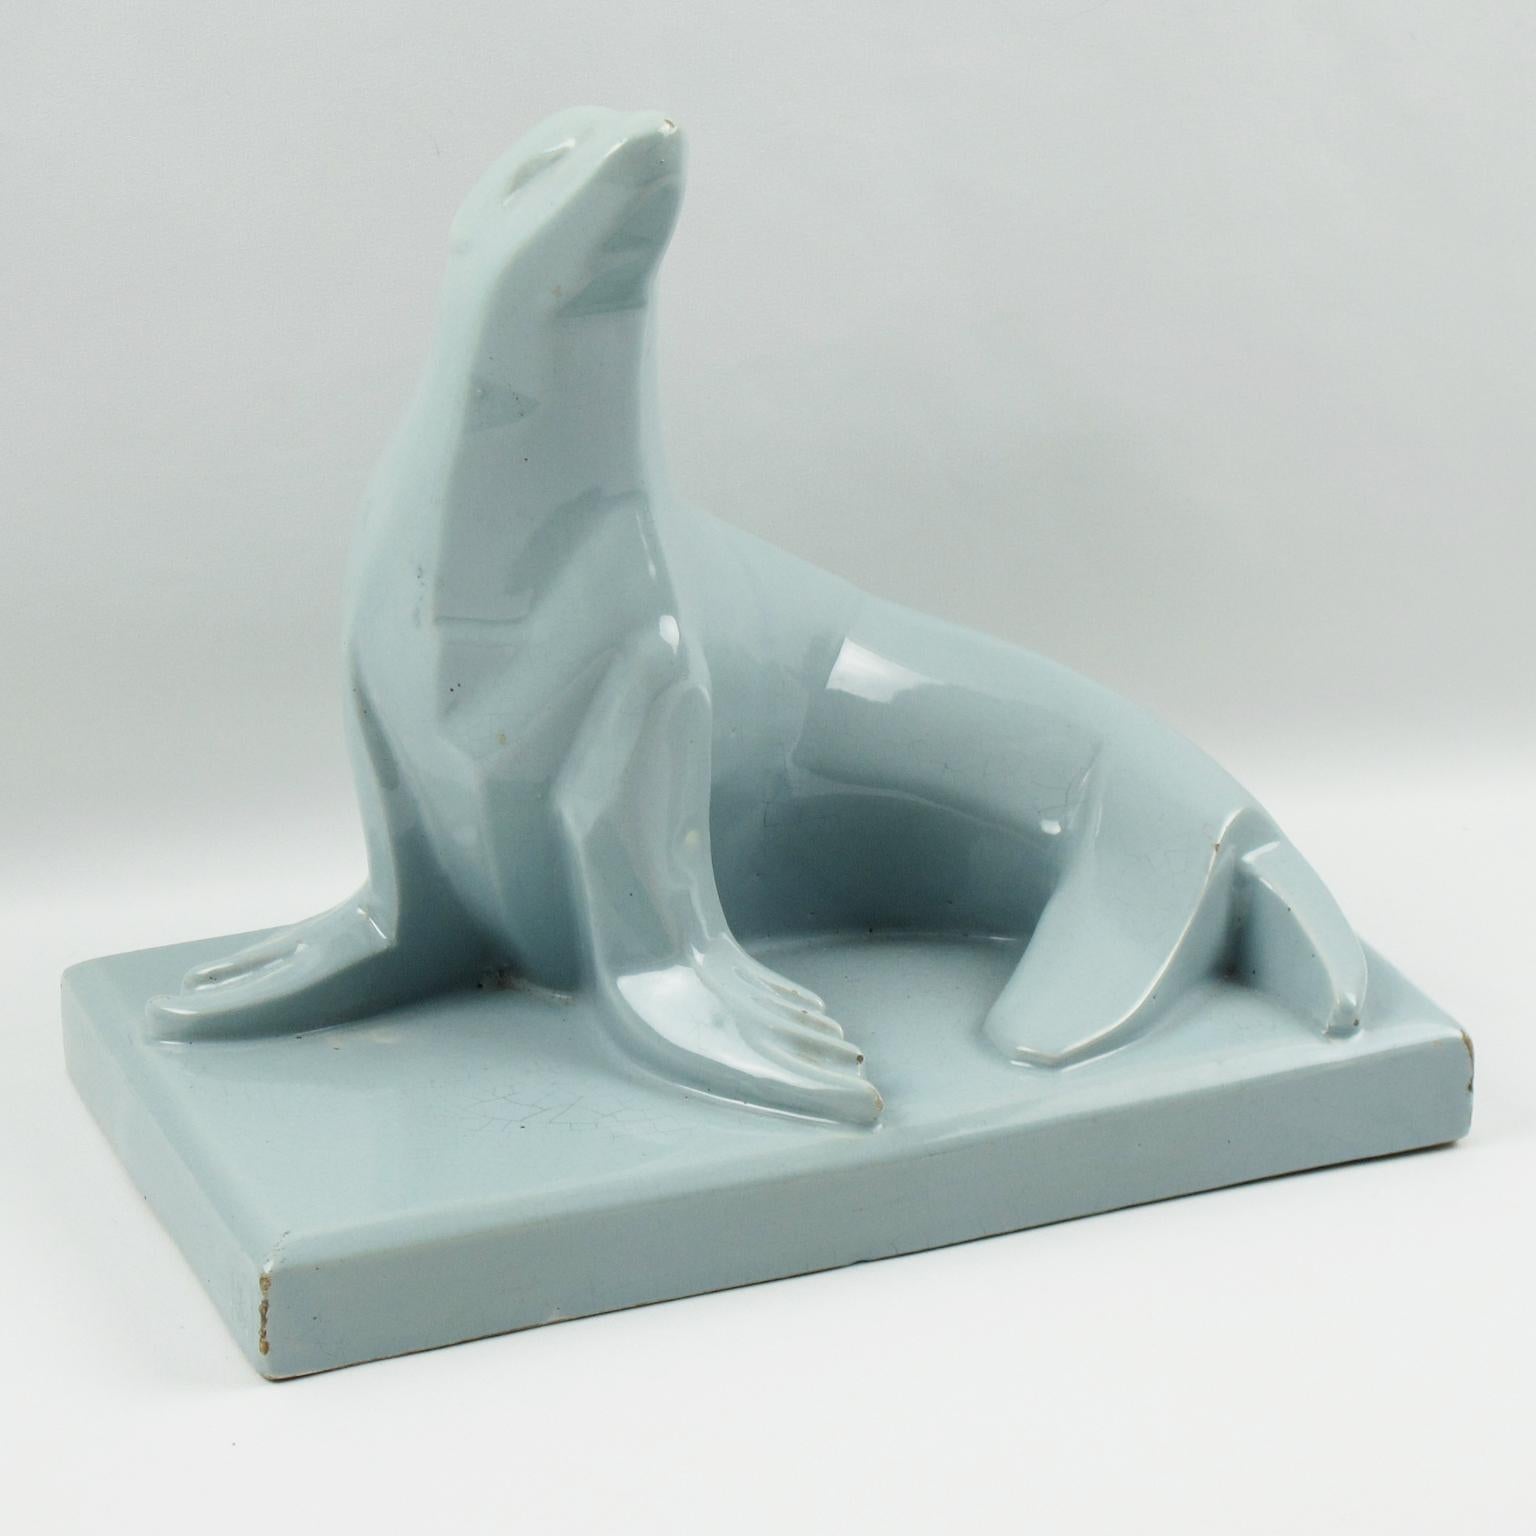 This stunning French Art Deco crackle-glazed cubist ceramic sculpture is extremely rare, both by the color and the model. This ceramic sculpture was designed and manufactured in Saint-Clement, France. The animal sculpture features a stylized seal